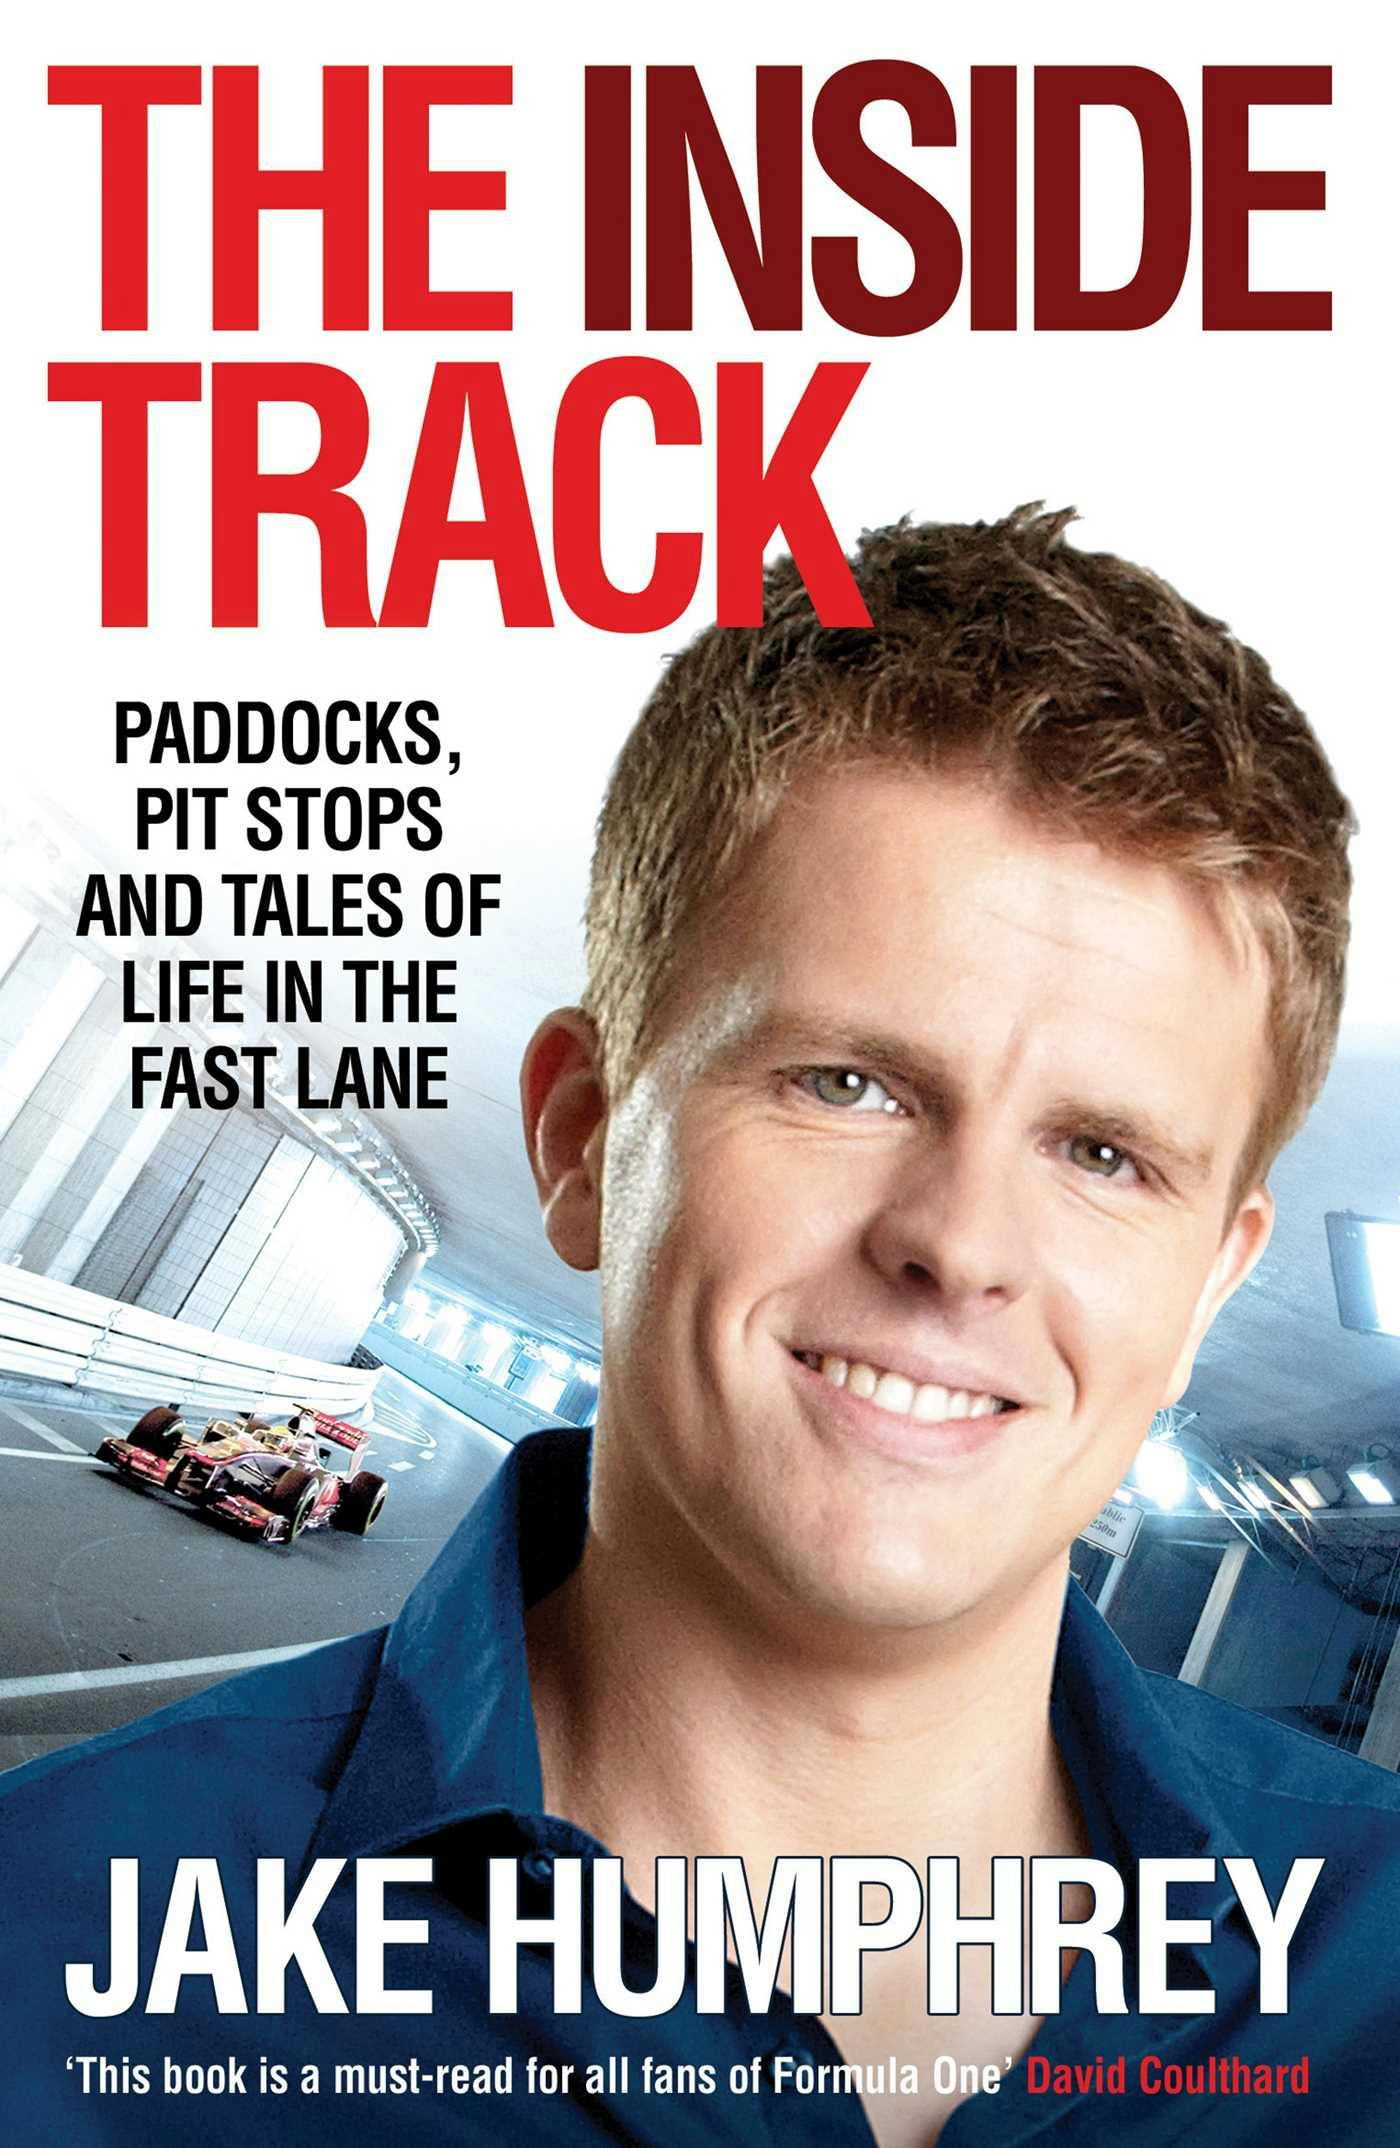 The Inside Track: Paddocks, Pit Stops and Tales of My Life in the Fast Lane - Jake Humphrey